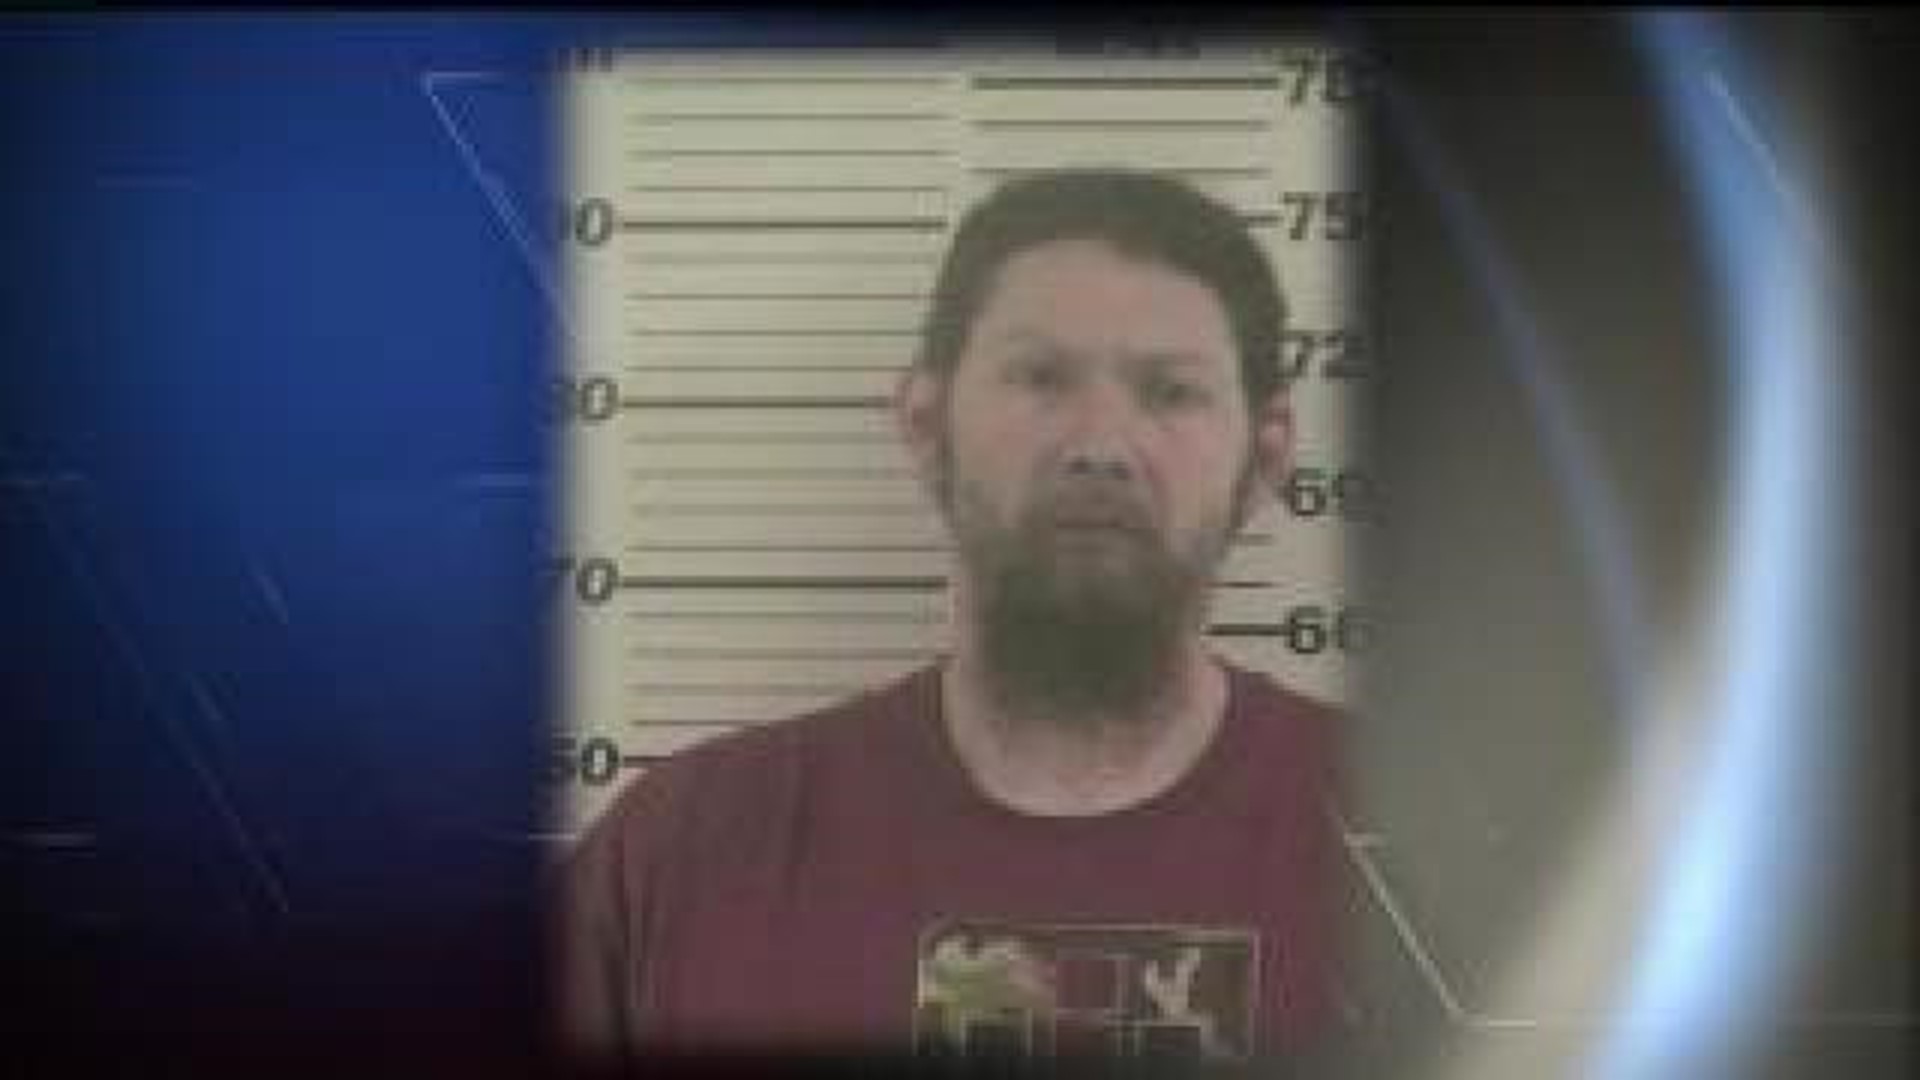 Rock Falls man arrested for animal cruelty has lengthy criminal history